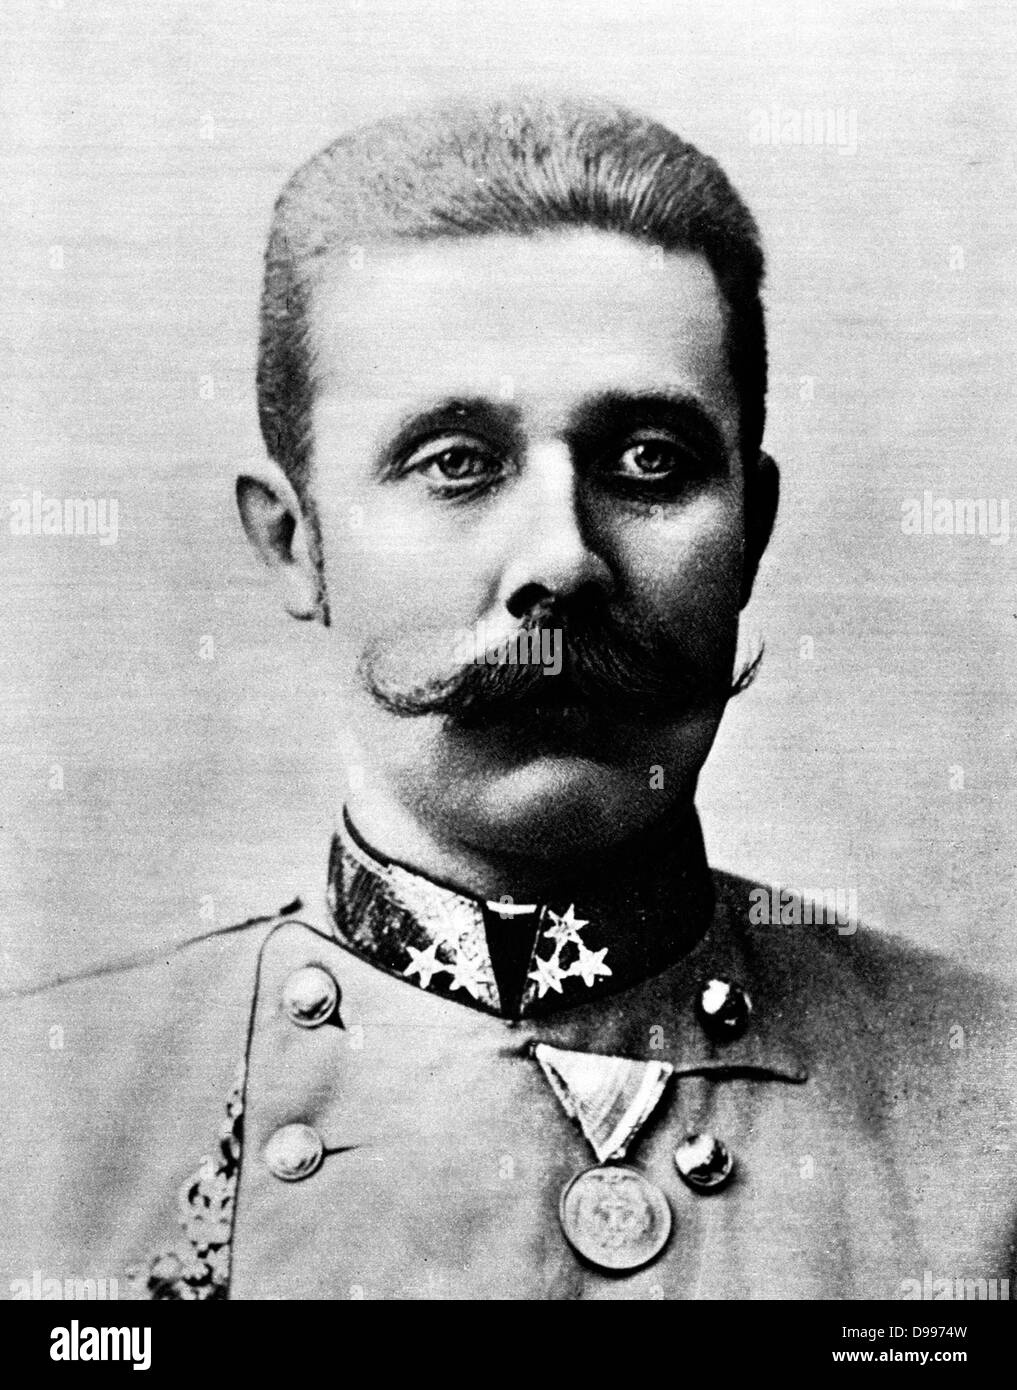 Franz Ferdinand (18 December 1863–28 June 1914) was an Archduke of Austria-Este, Austro-Hungarian and Royal Prince of Hungary and of Bohemia, and from 1889 until his death, heir presumptive to the Austro-Hungarian throne. His assassination in Sarajevo precipitated Austria-Hungary's declaration of war against Serbia Stock Photo